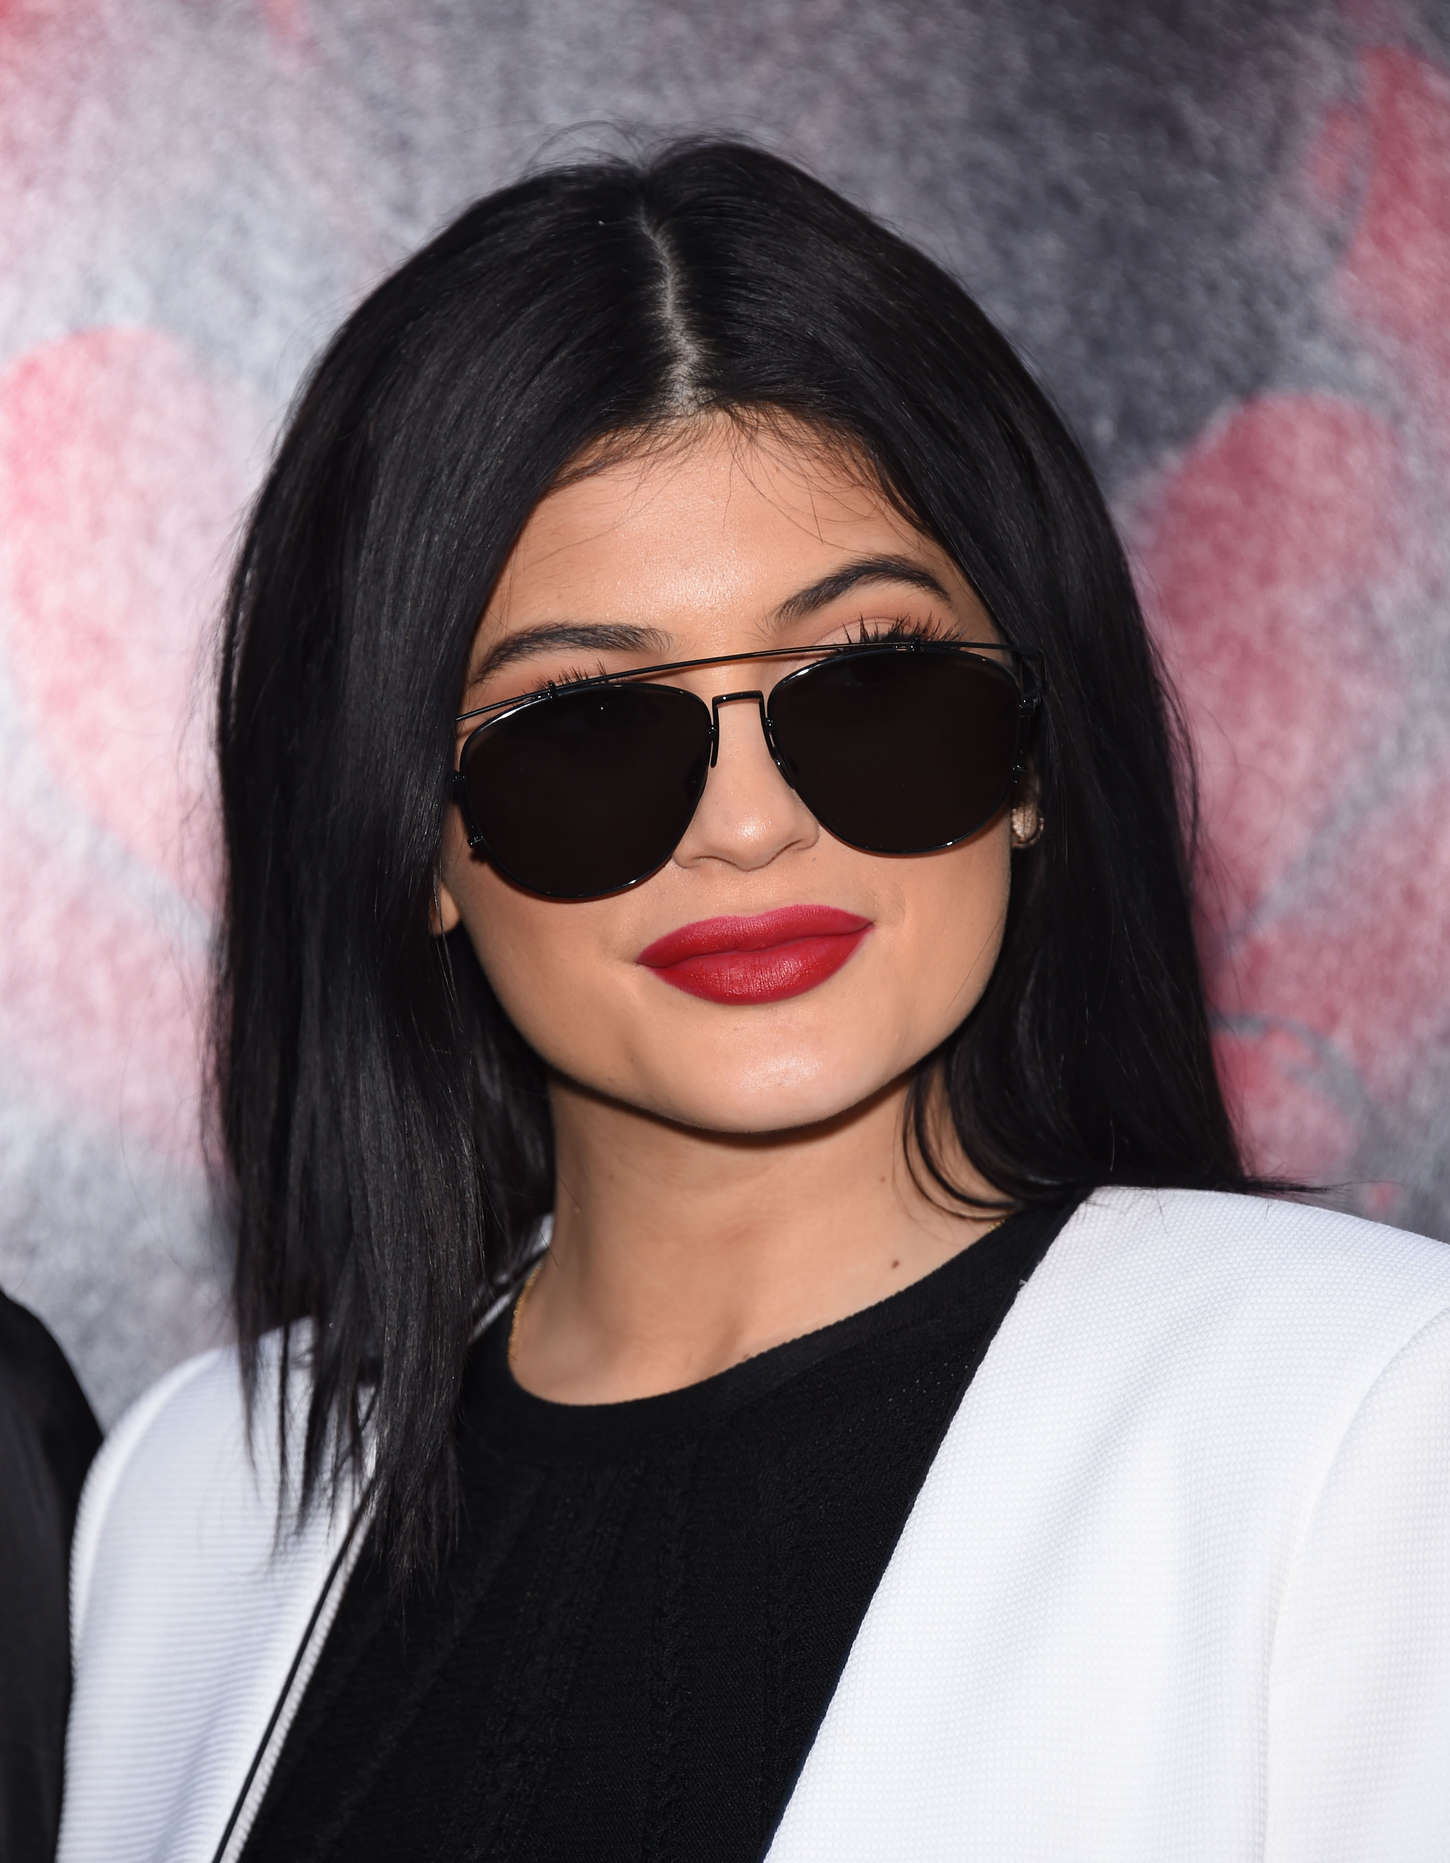 Kylie Jenner - 'The Gallows' Premiere in LA. 